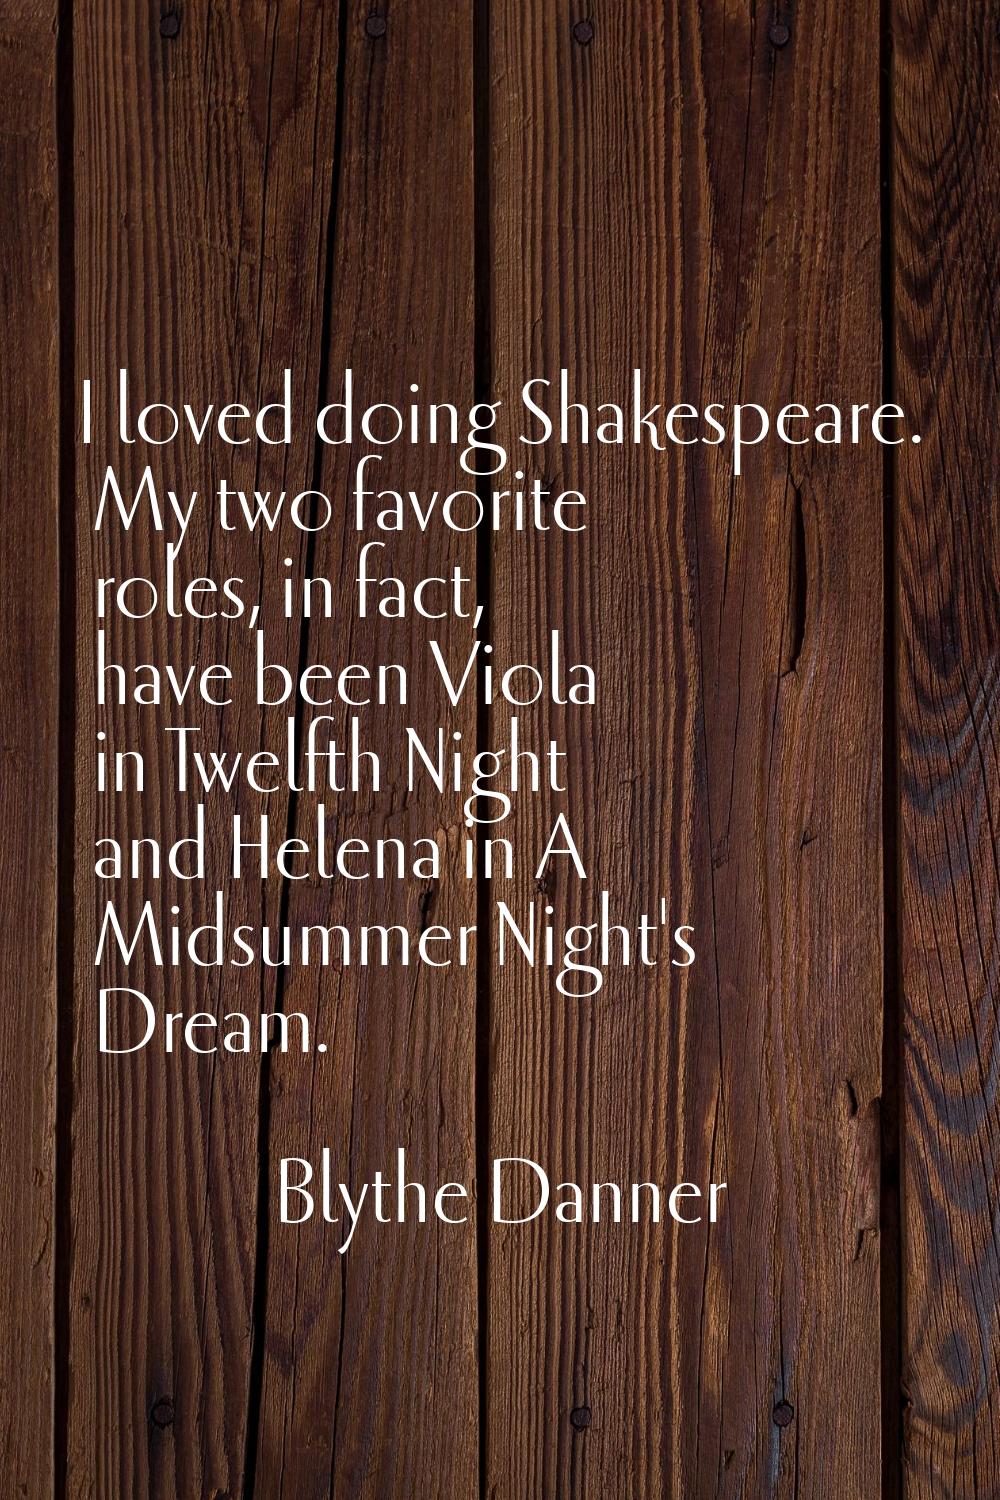 I loved doing Shakespeare. My two favorite roles, in fact, have been Viola in Twelfth Night and Hel